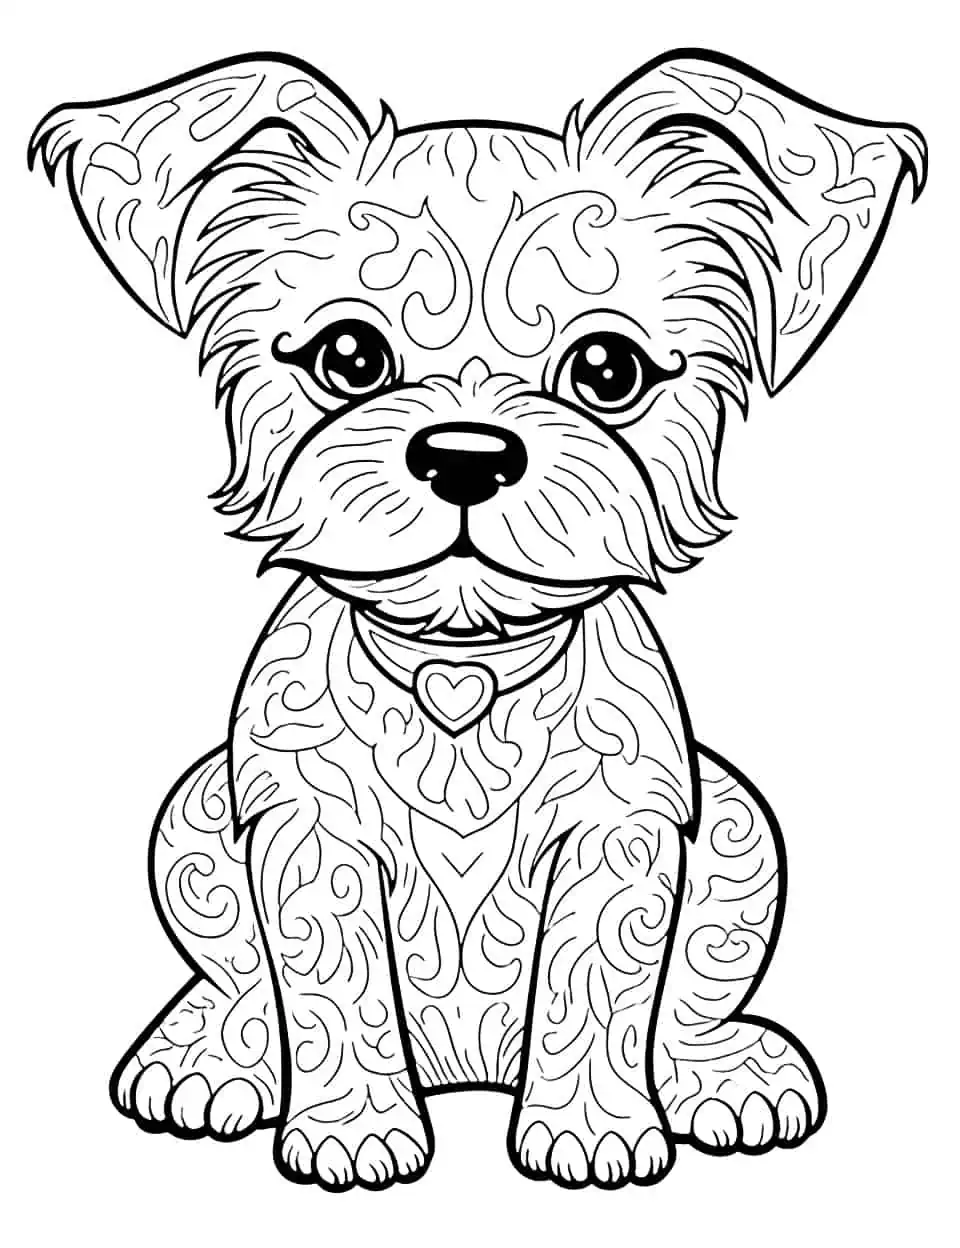 Mandala and Yorkie Mix Coloring Page - A cute Yorkie surrounded by a complex mandala design.